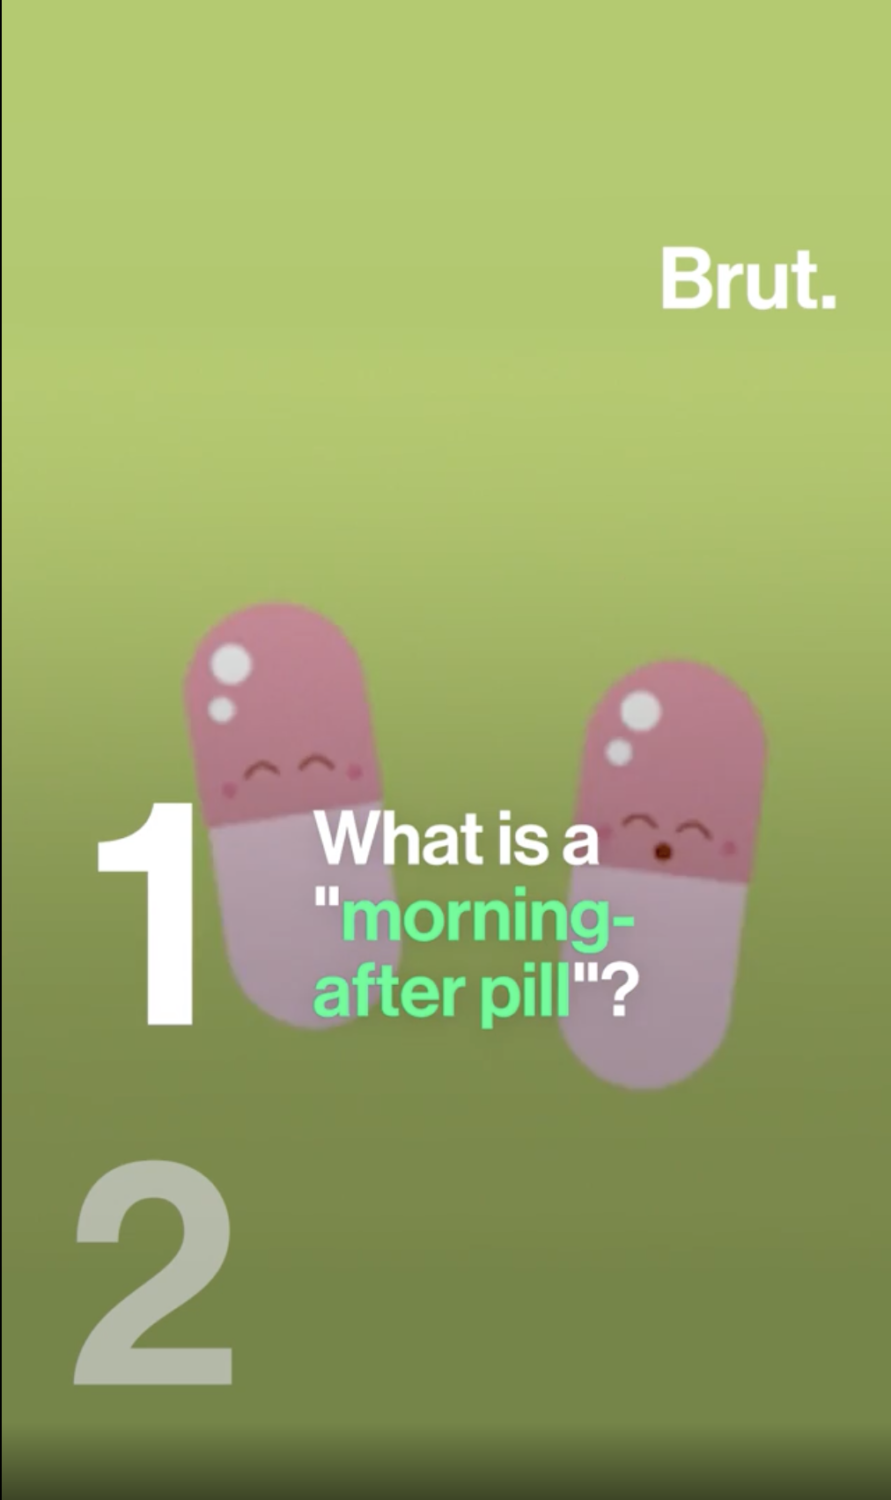 All You Need To Know About The Morning-After Pill